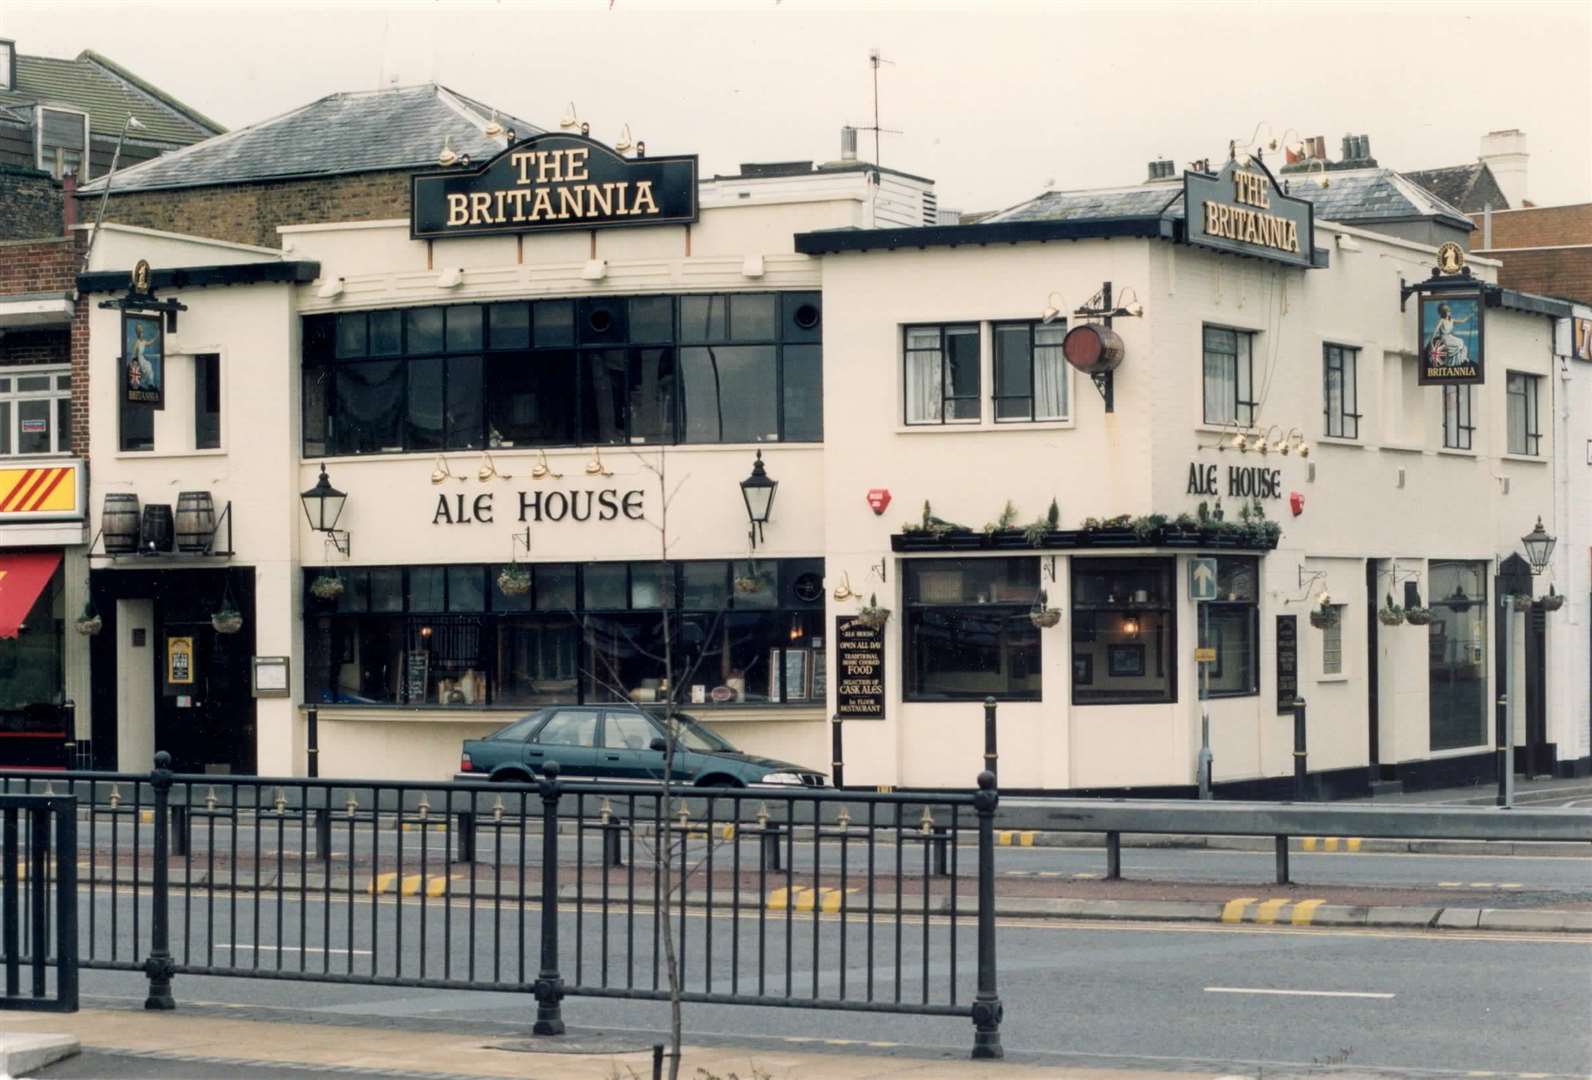 The Britannia pub in Townwall Street, Dover, in 1995. It closed in 2008 and by 2011 had been demolished